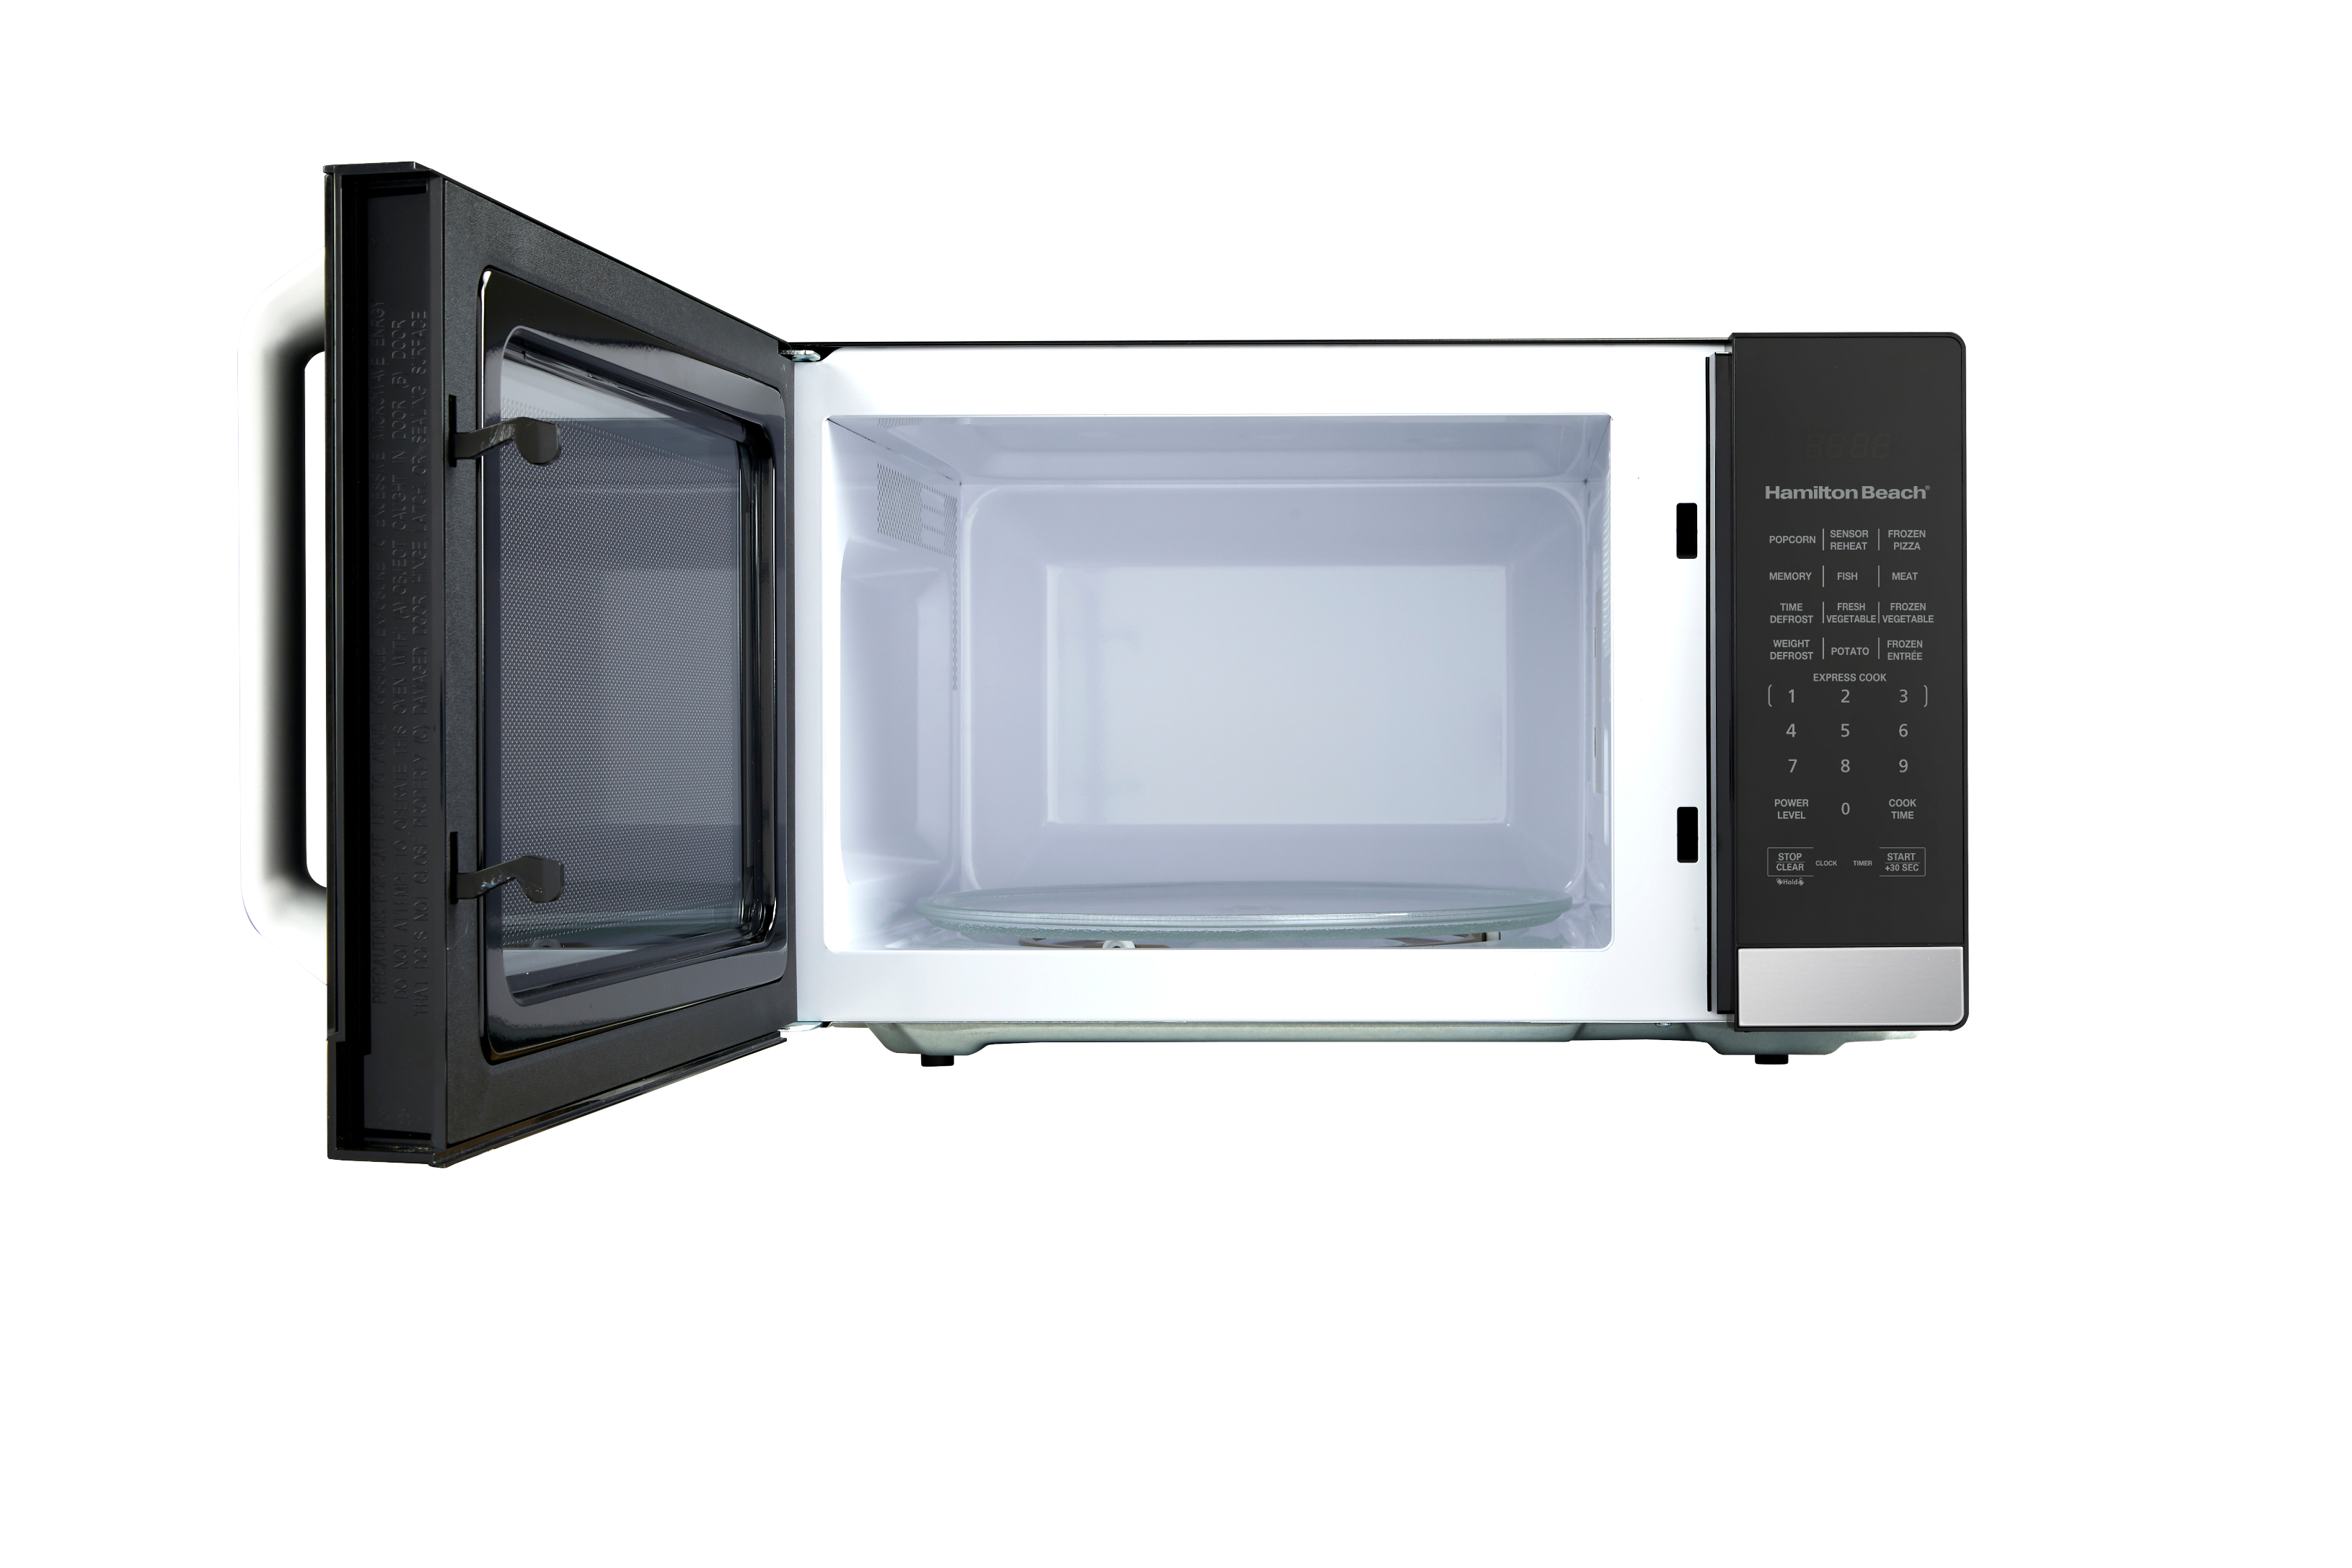 Hamilton Beach 1.4 Cu.ft. Microwave Oven, Stainless Steel, with Sensor - image 2 of 6